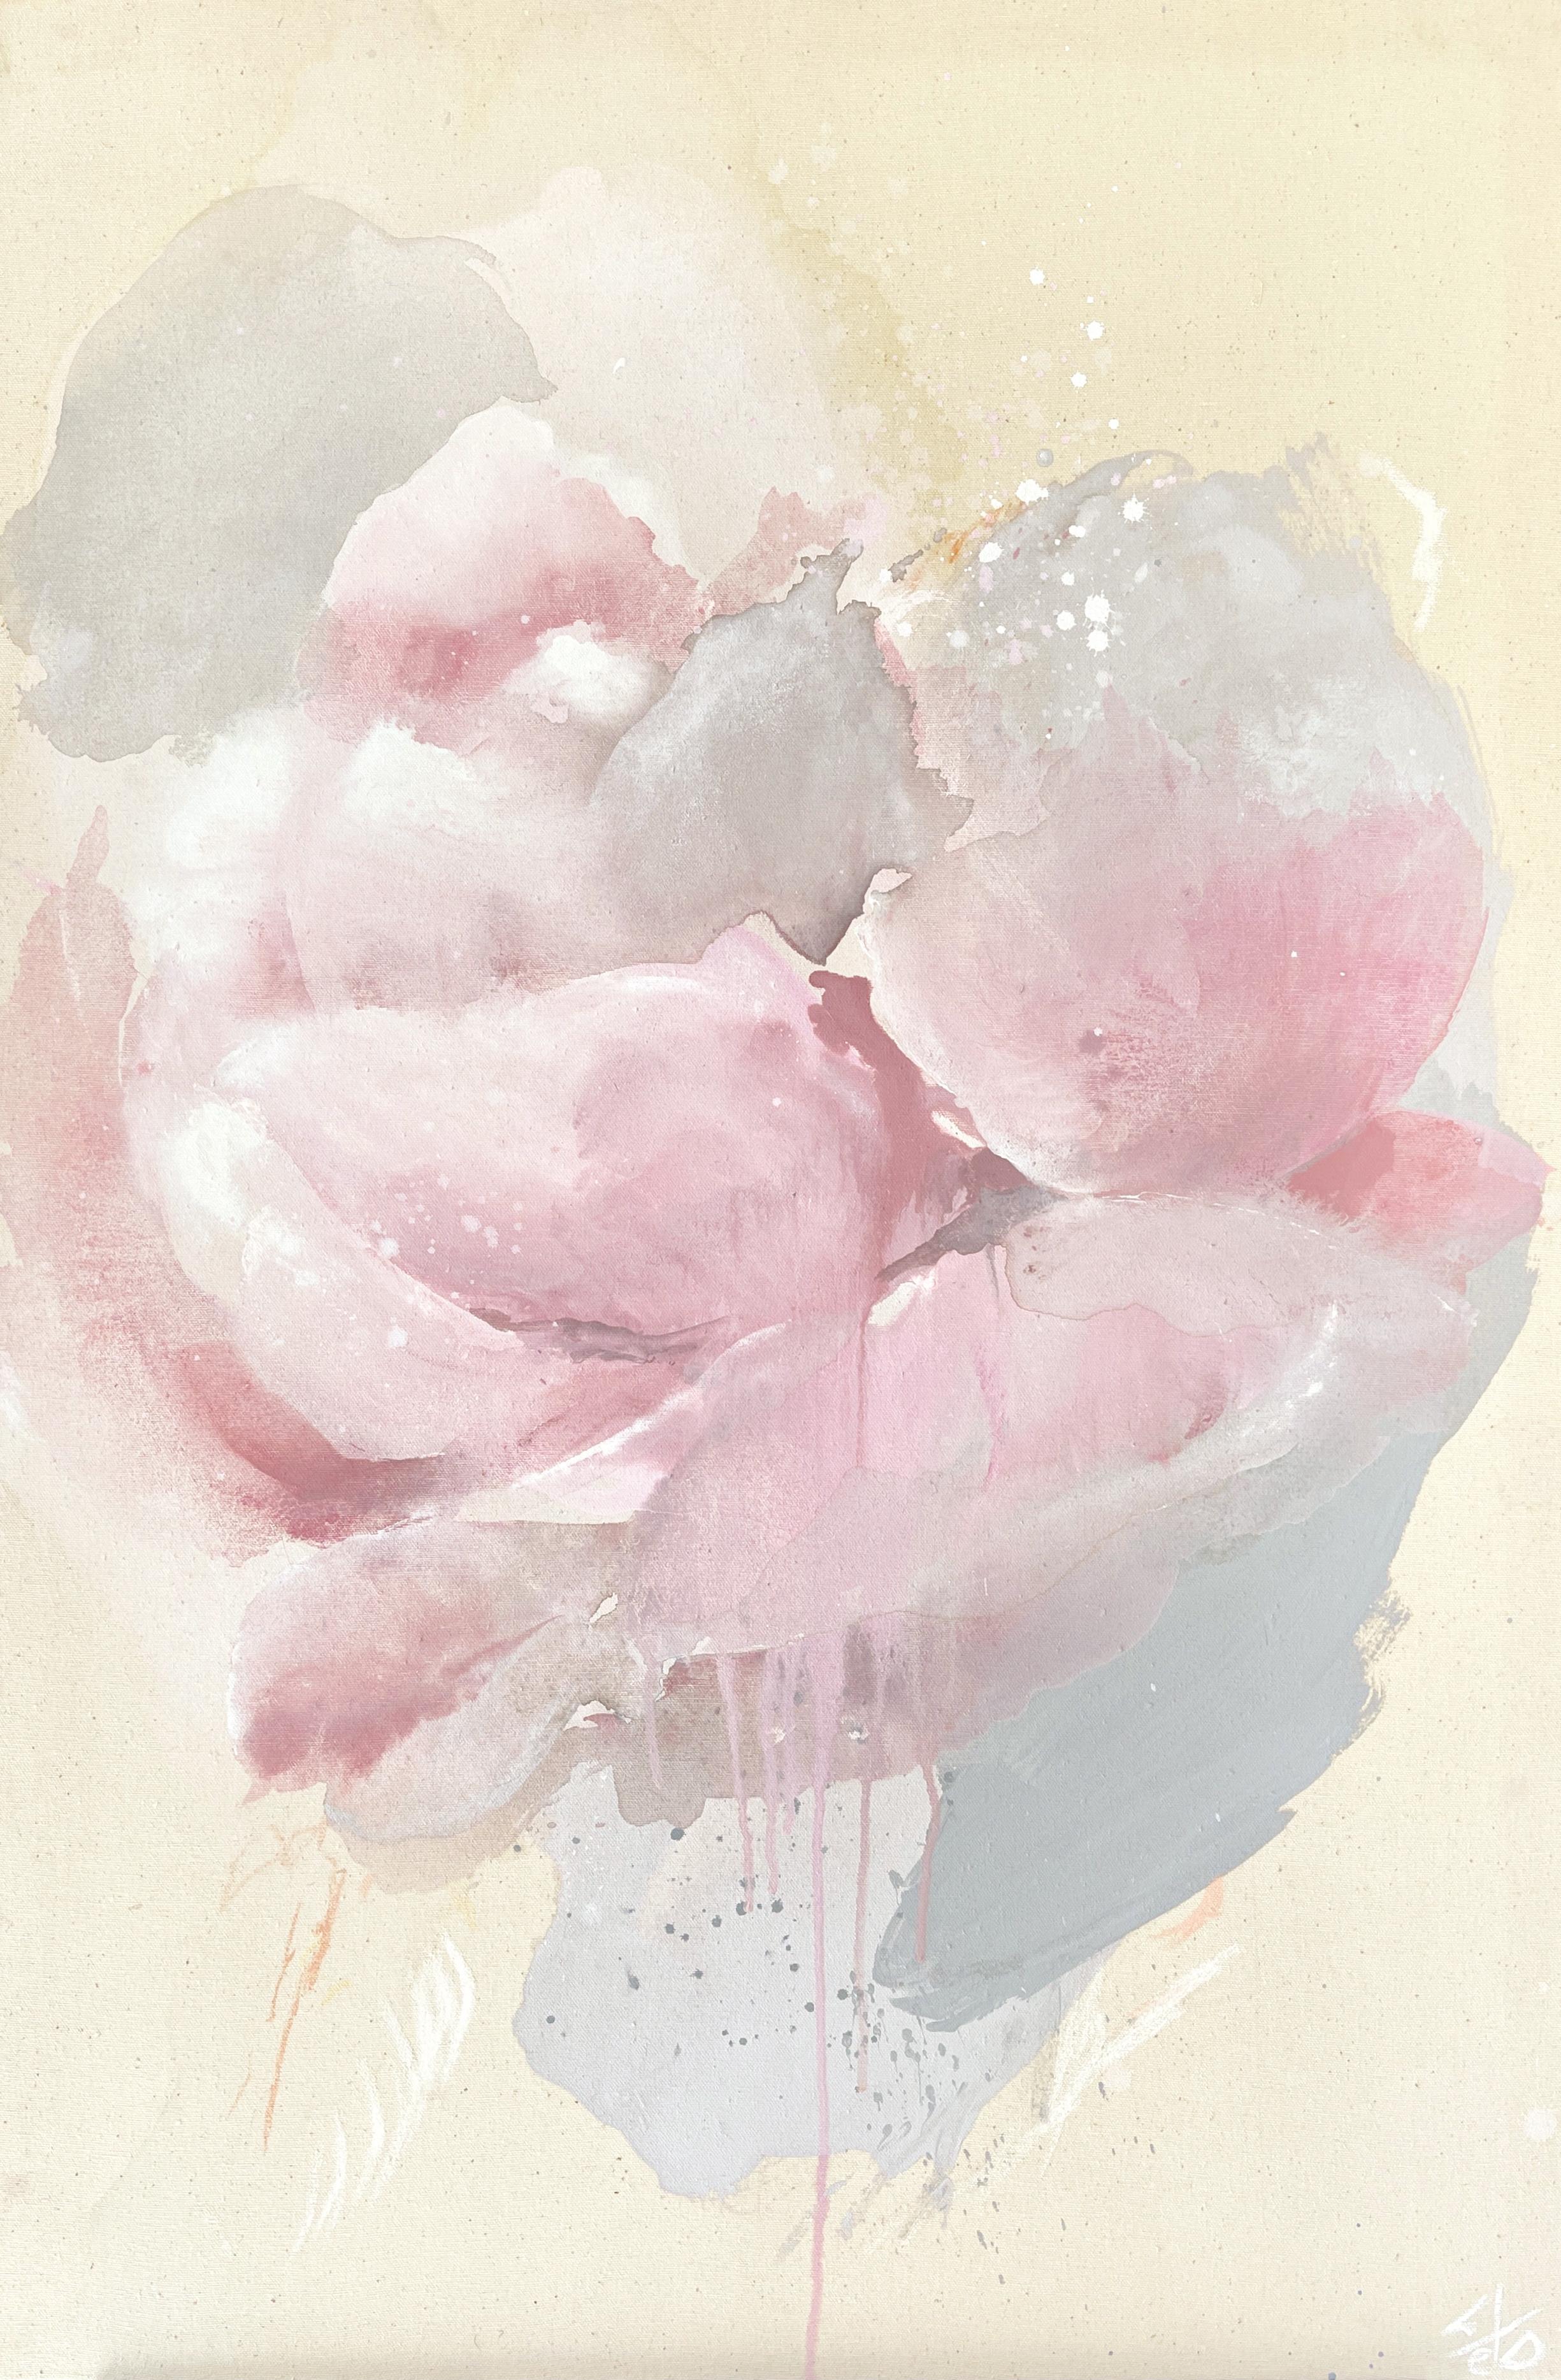 Lesia Danilina Abstract Painting - "Endless Summer" flowers, peony, raw canvas, semi-abstract, delicate pink